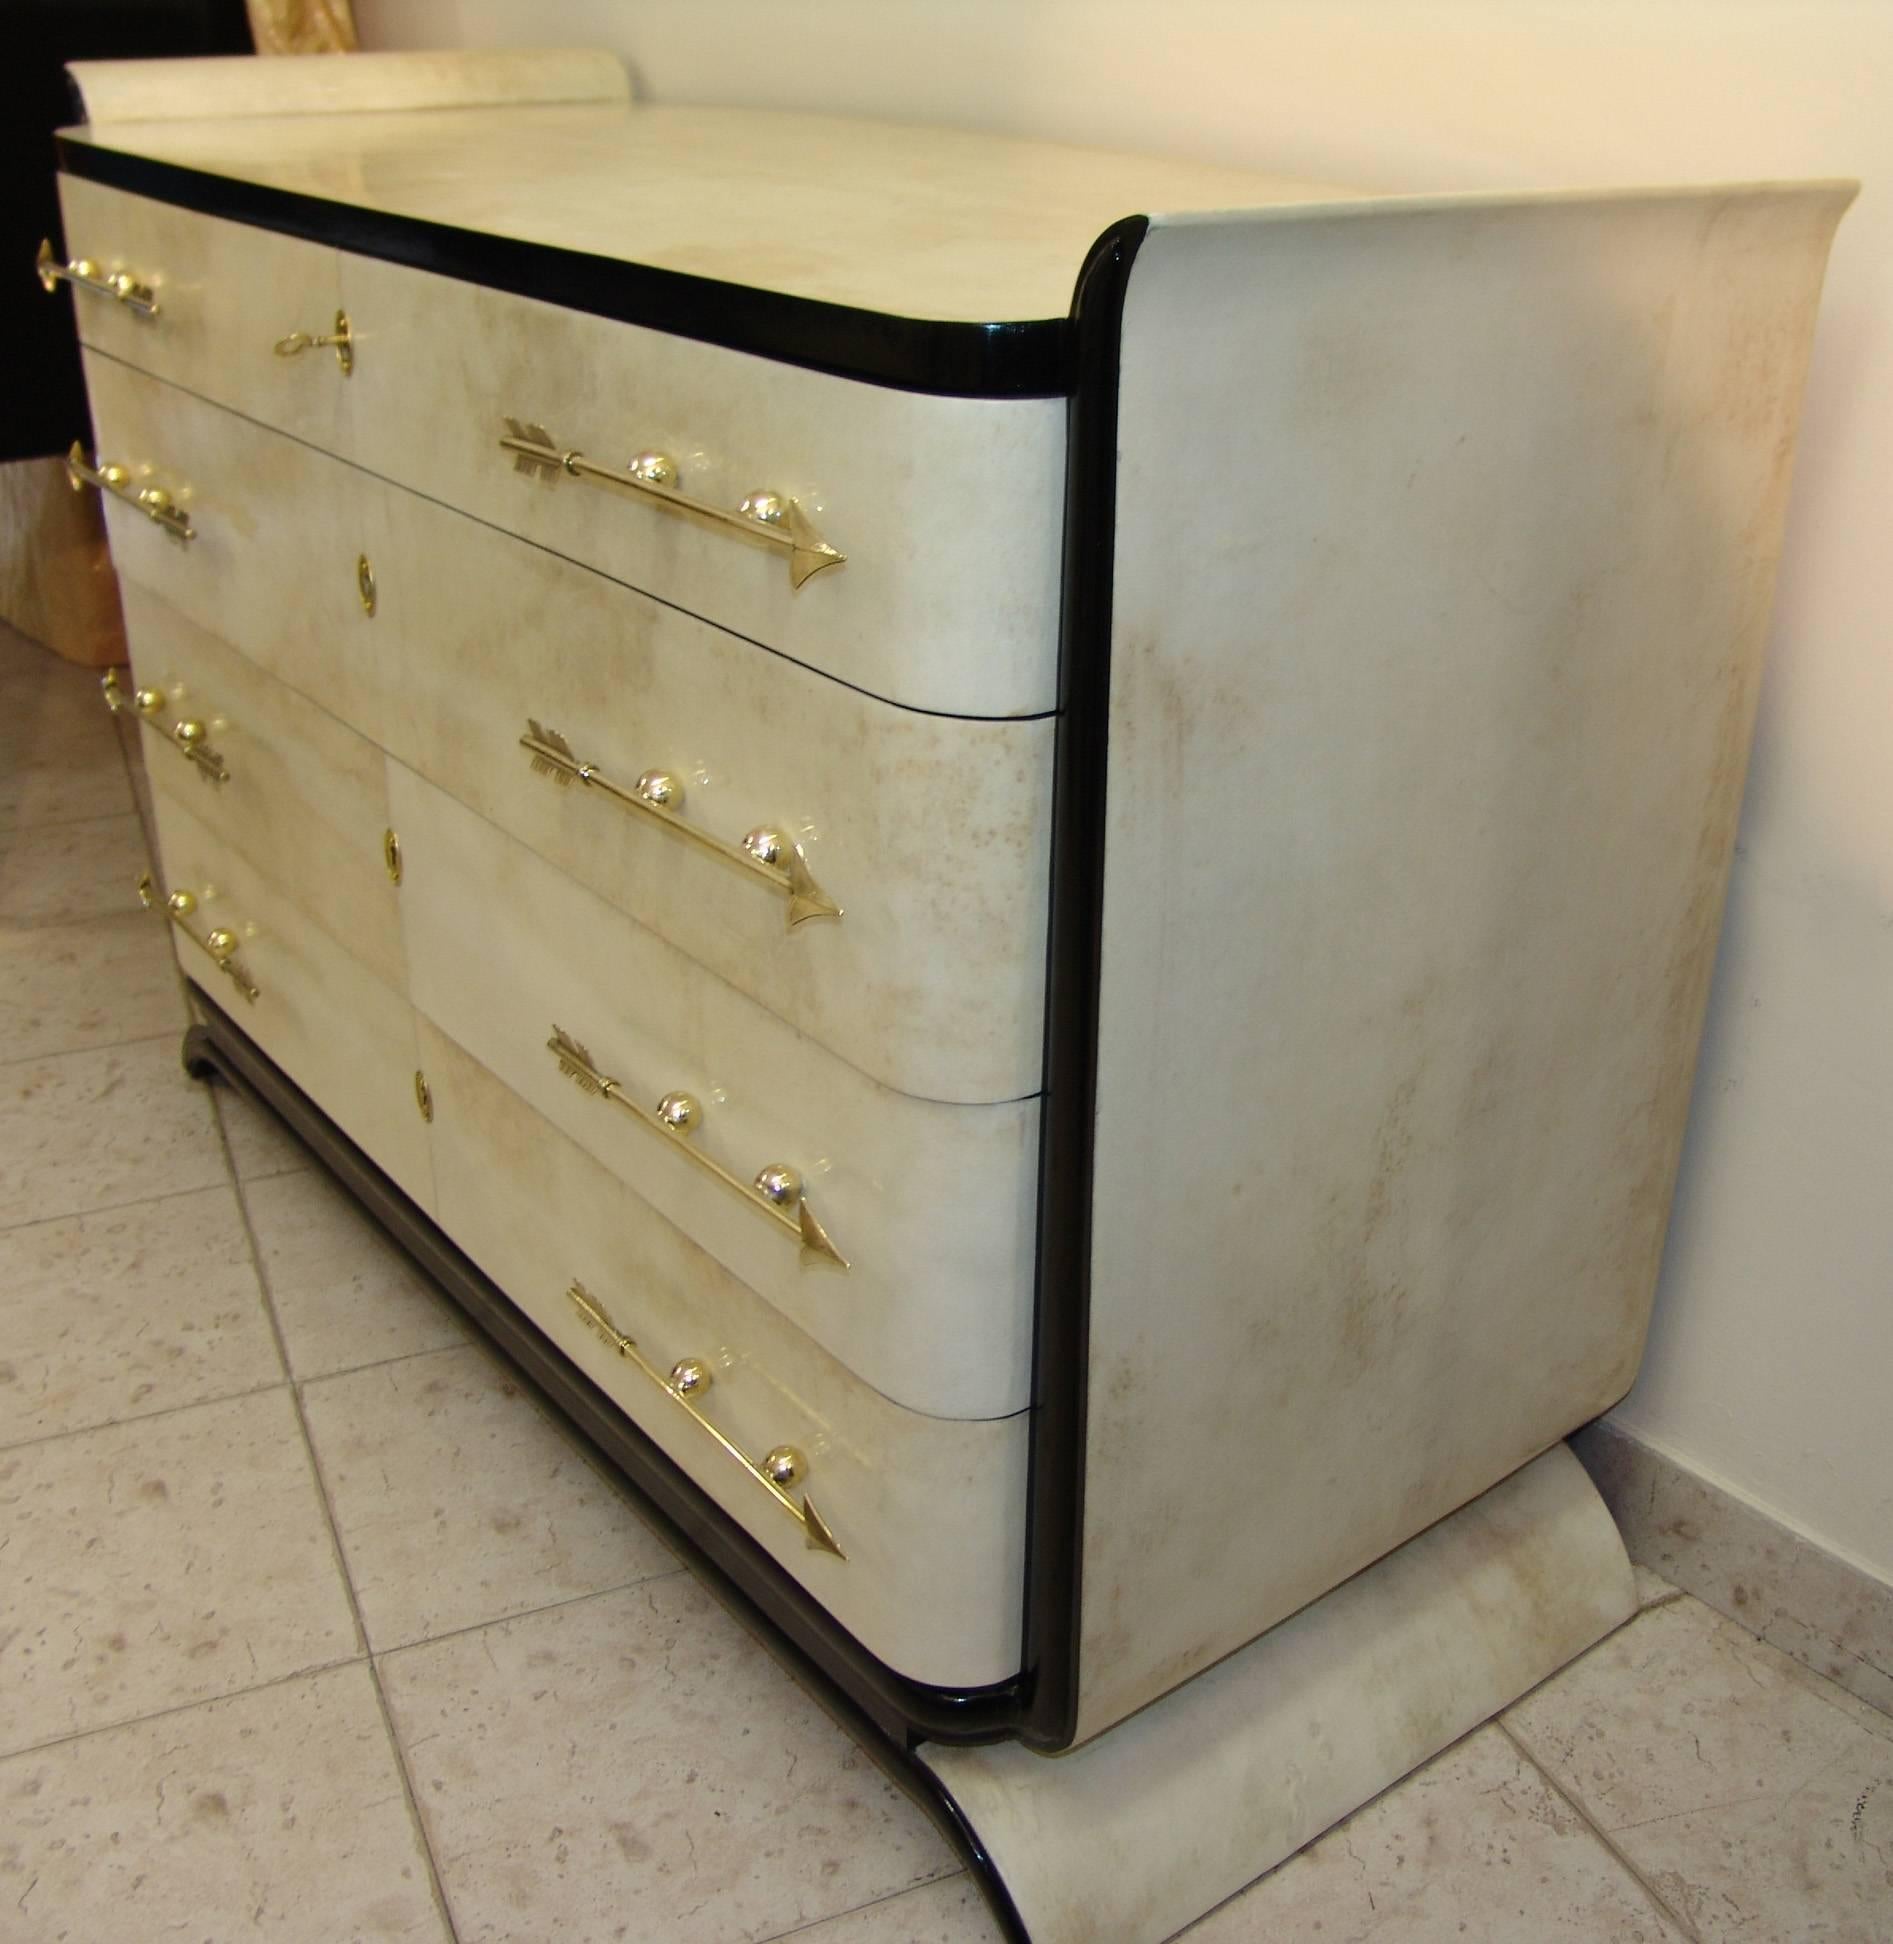 Exclusive 1930s dresser made of parchment with ebonized details, the handles are in a brass fusion.